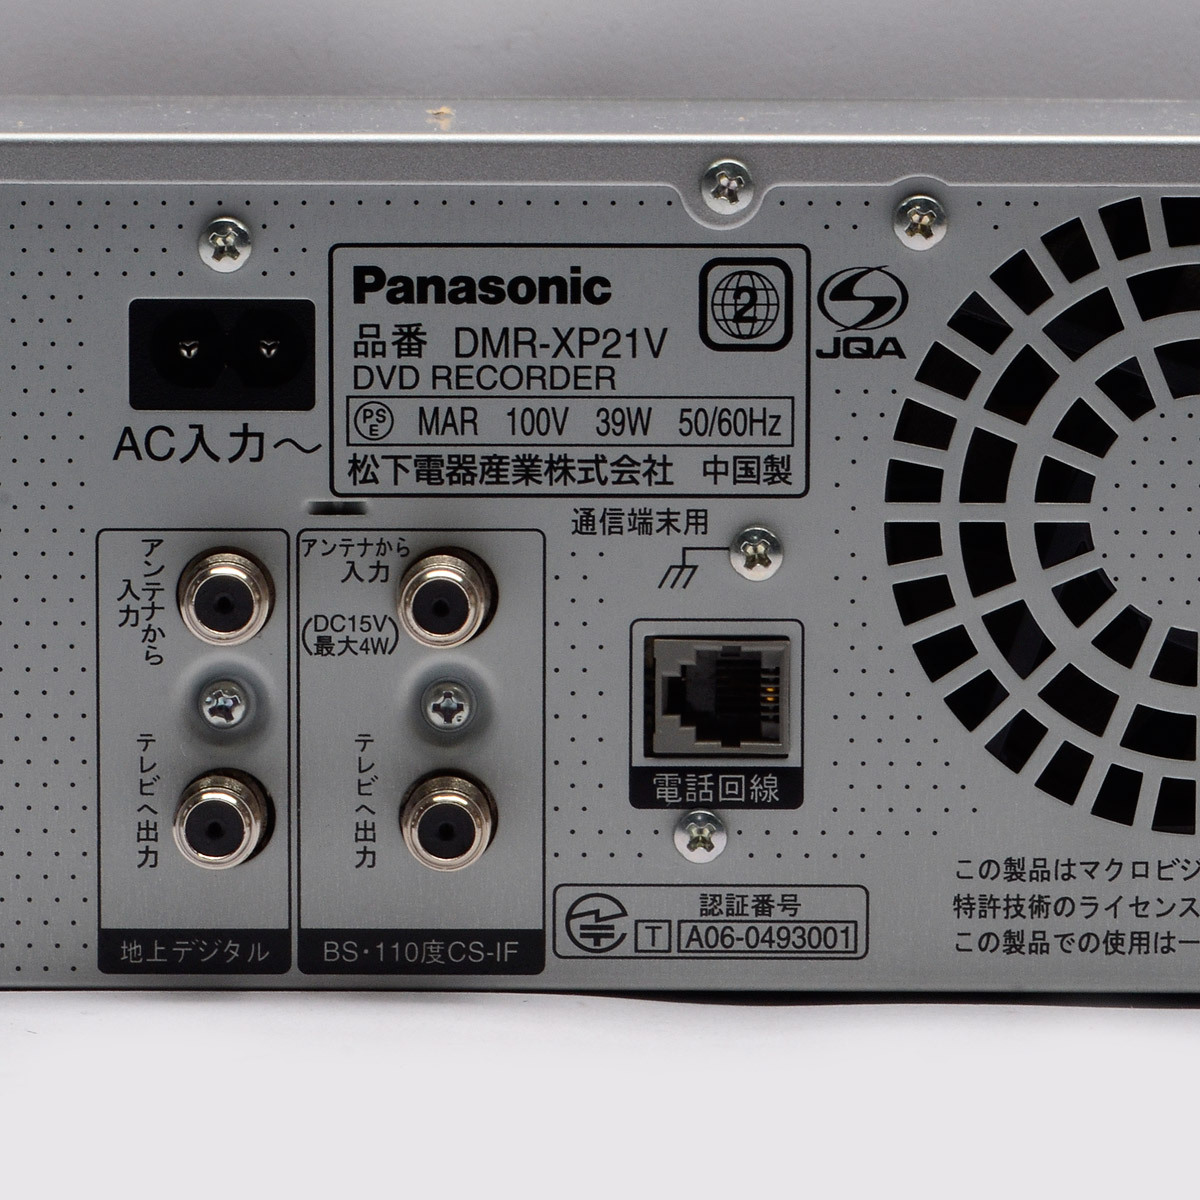 Panasonic HDD installing VHS one body Hi-Vision DVD recorder DMR-XP21V 07 year made remote control attaching video deck 